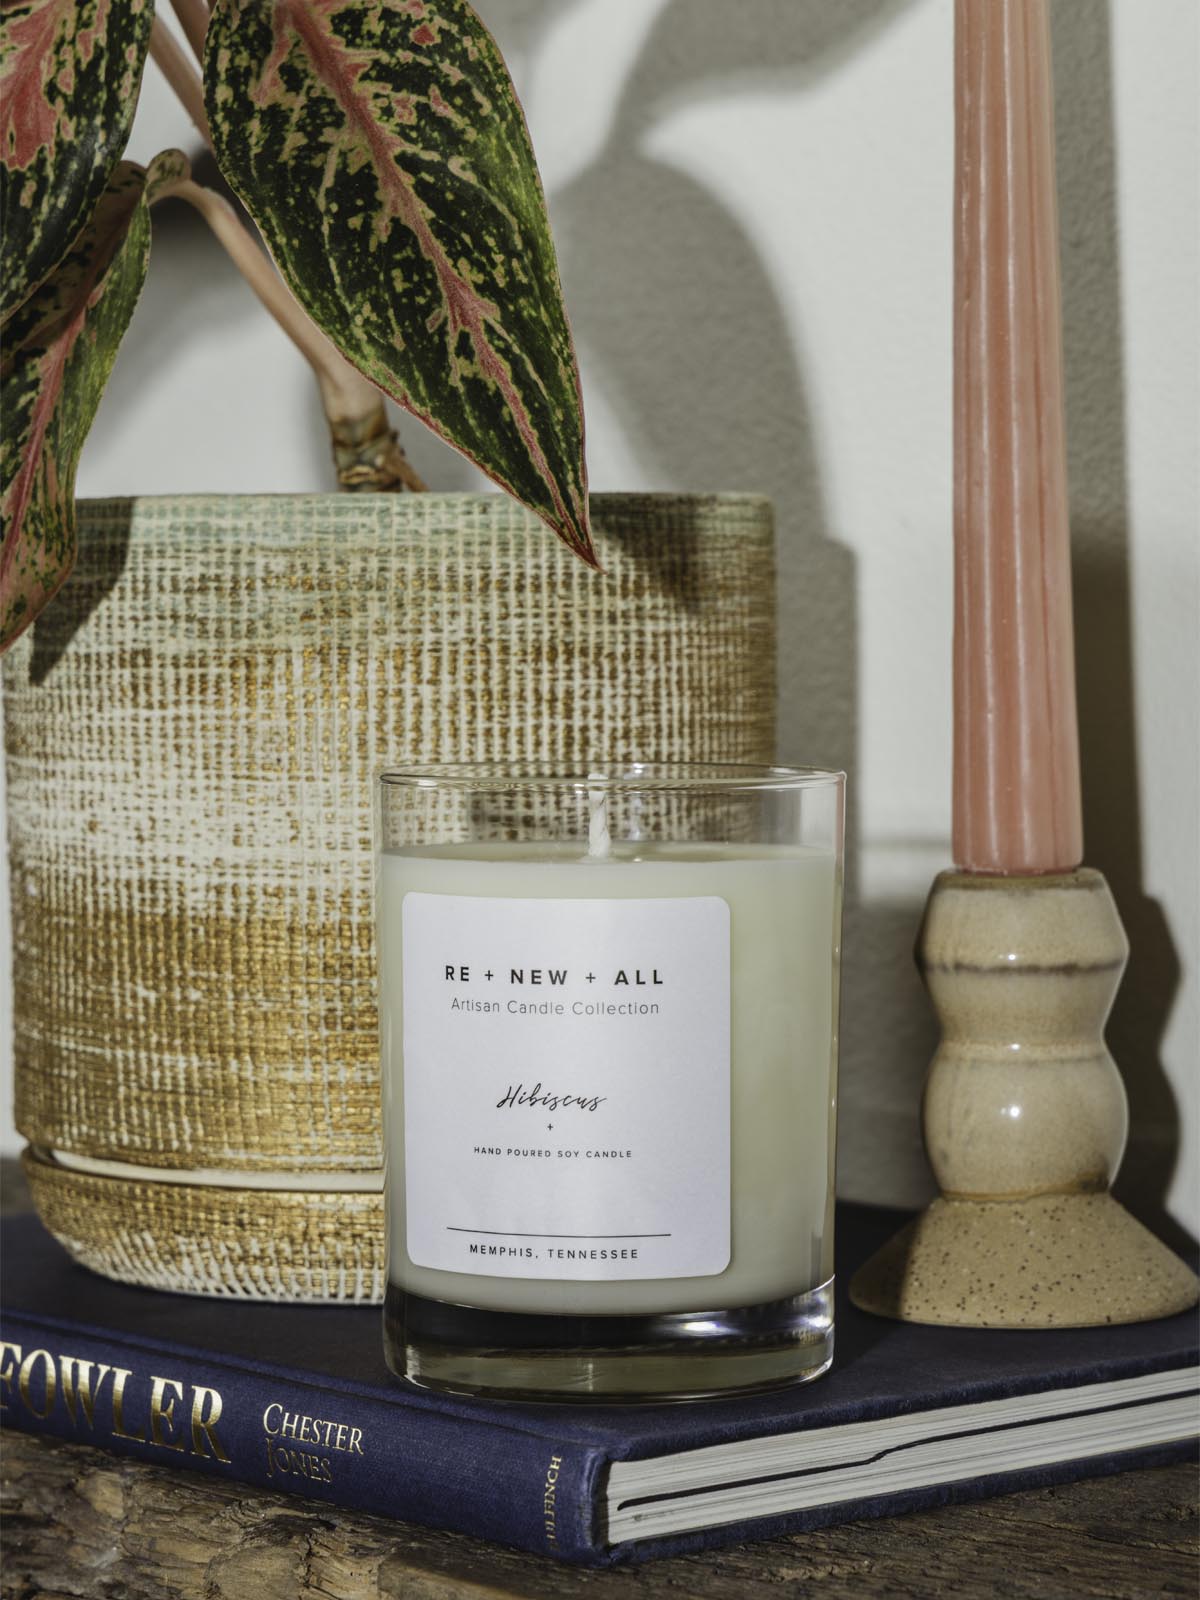 Re+New+All Candles